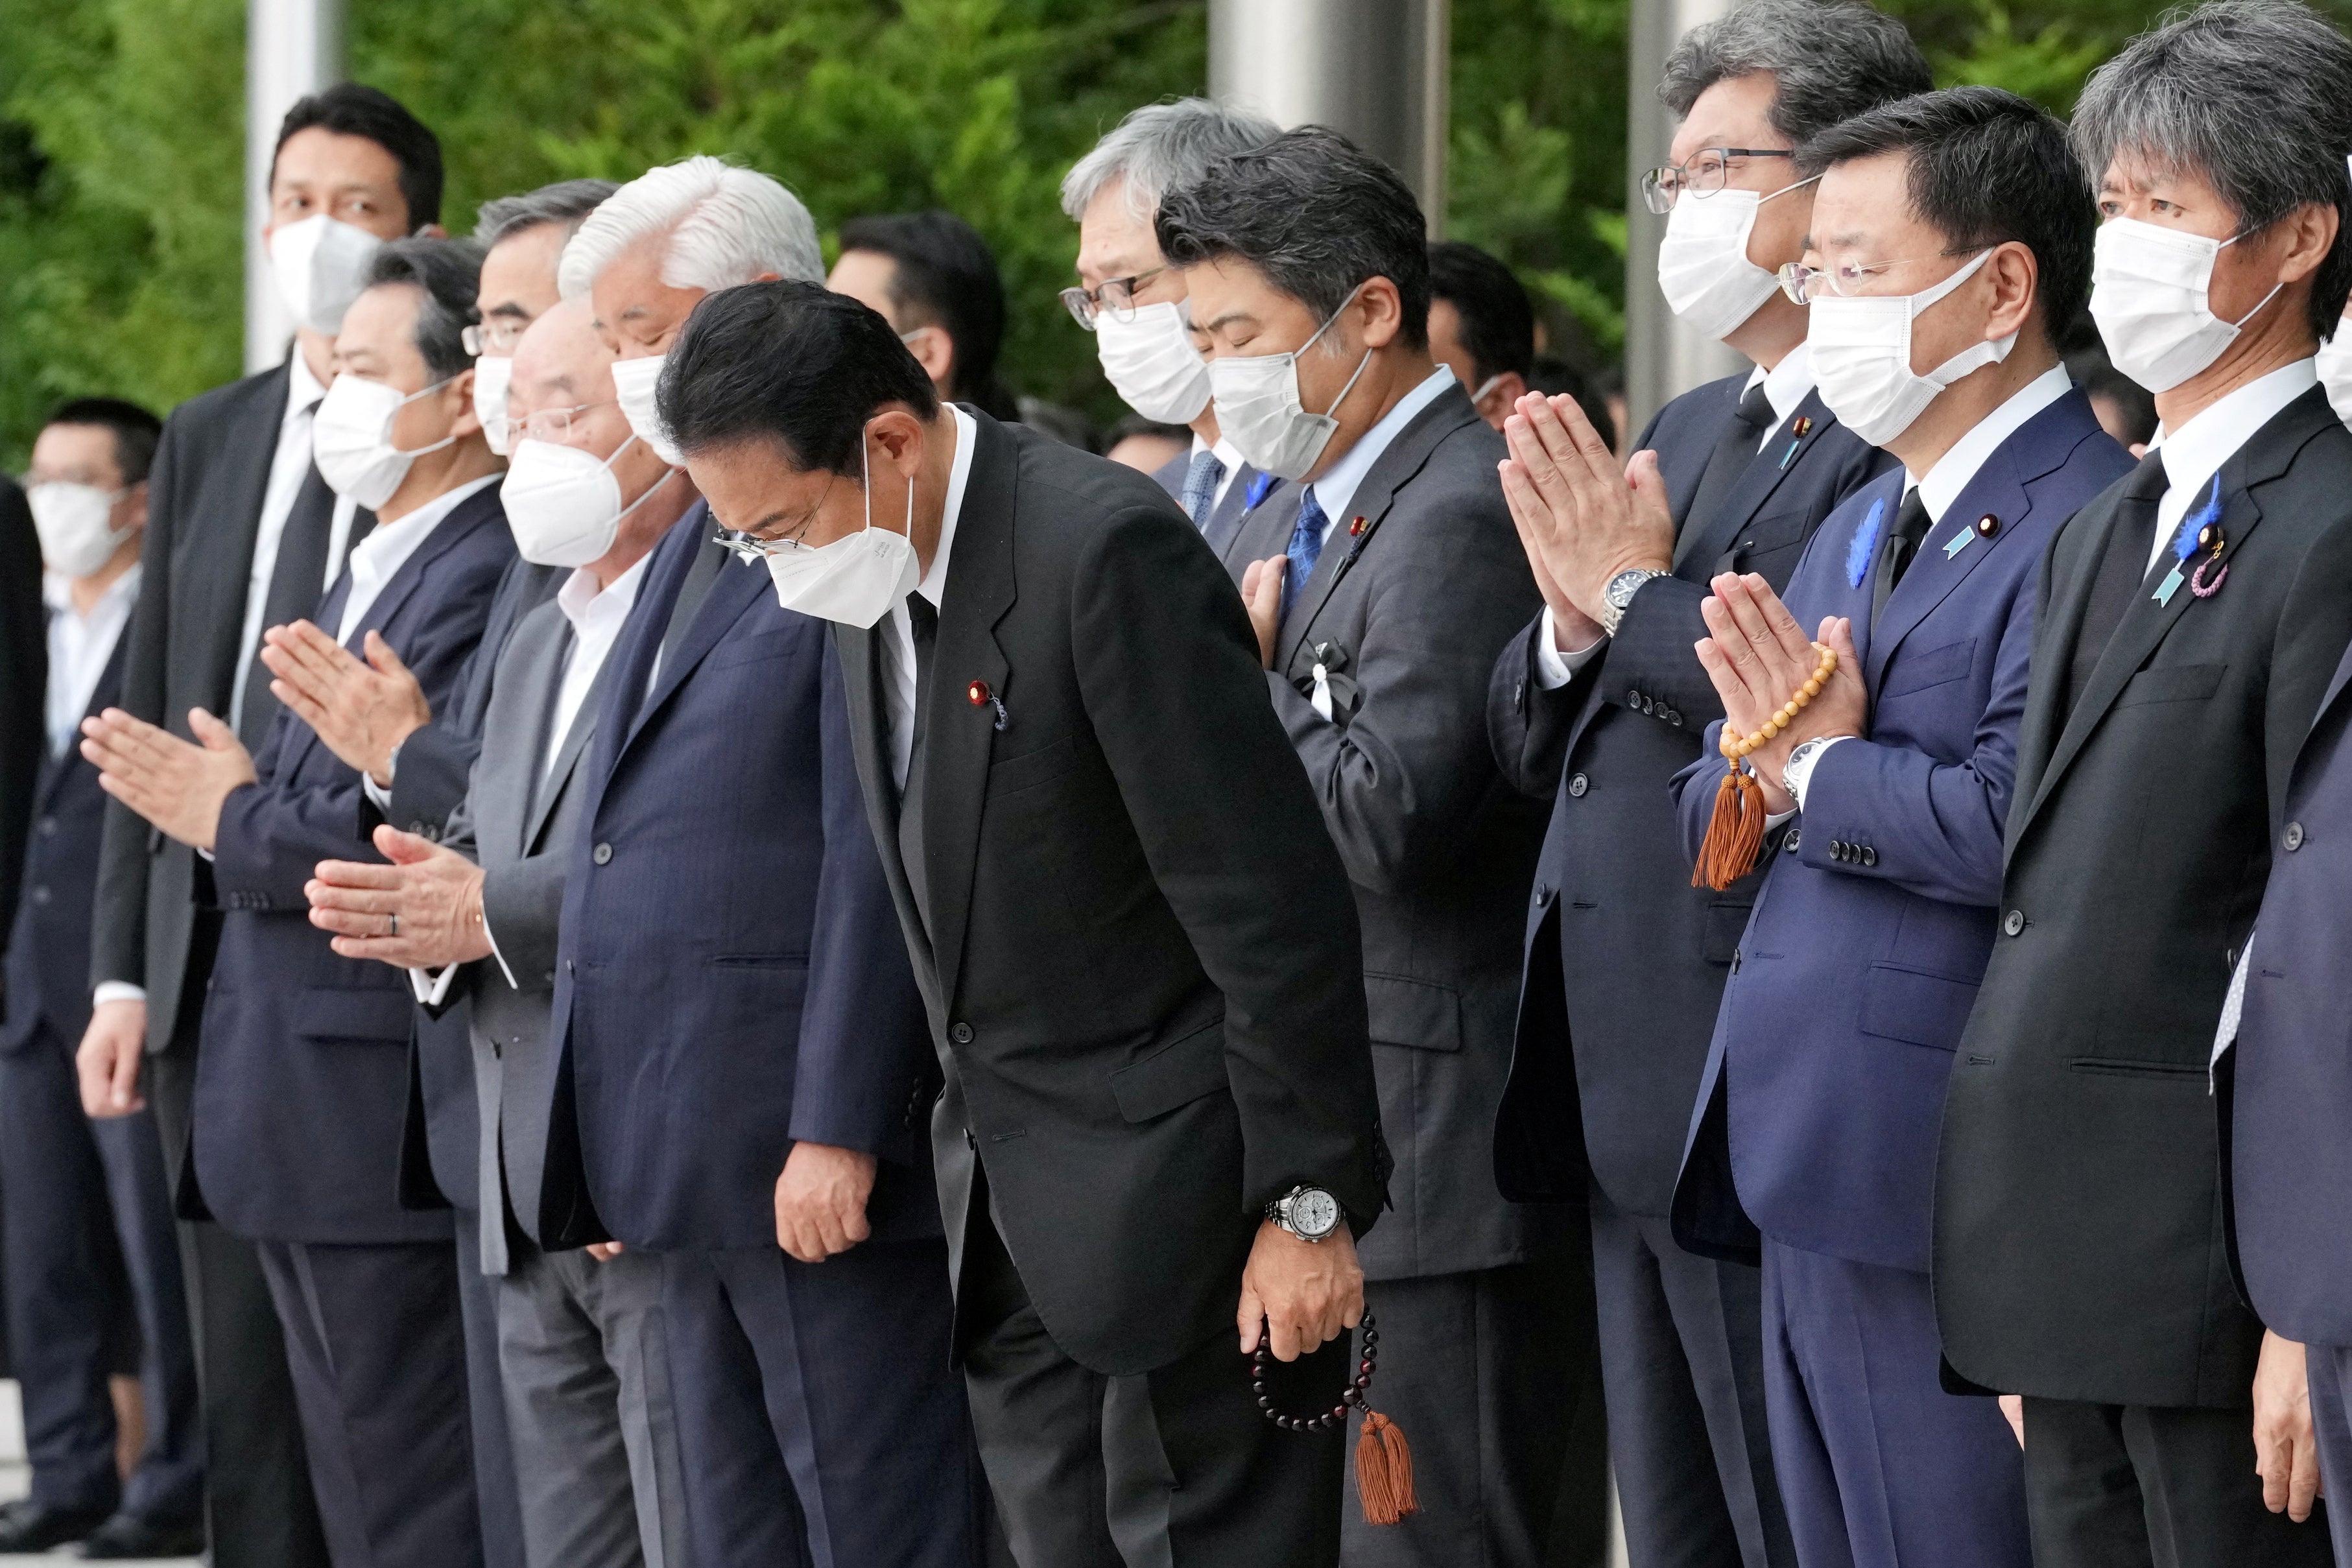 Japan’s prime minister Fumio Kishida, alongside officials and employees, offers prayers as the funeral procession passes